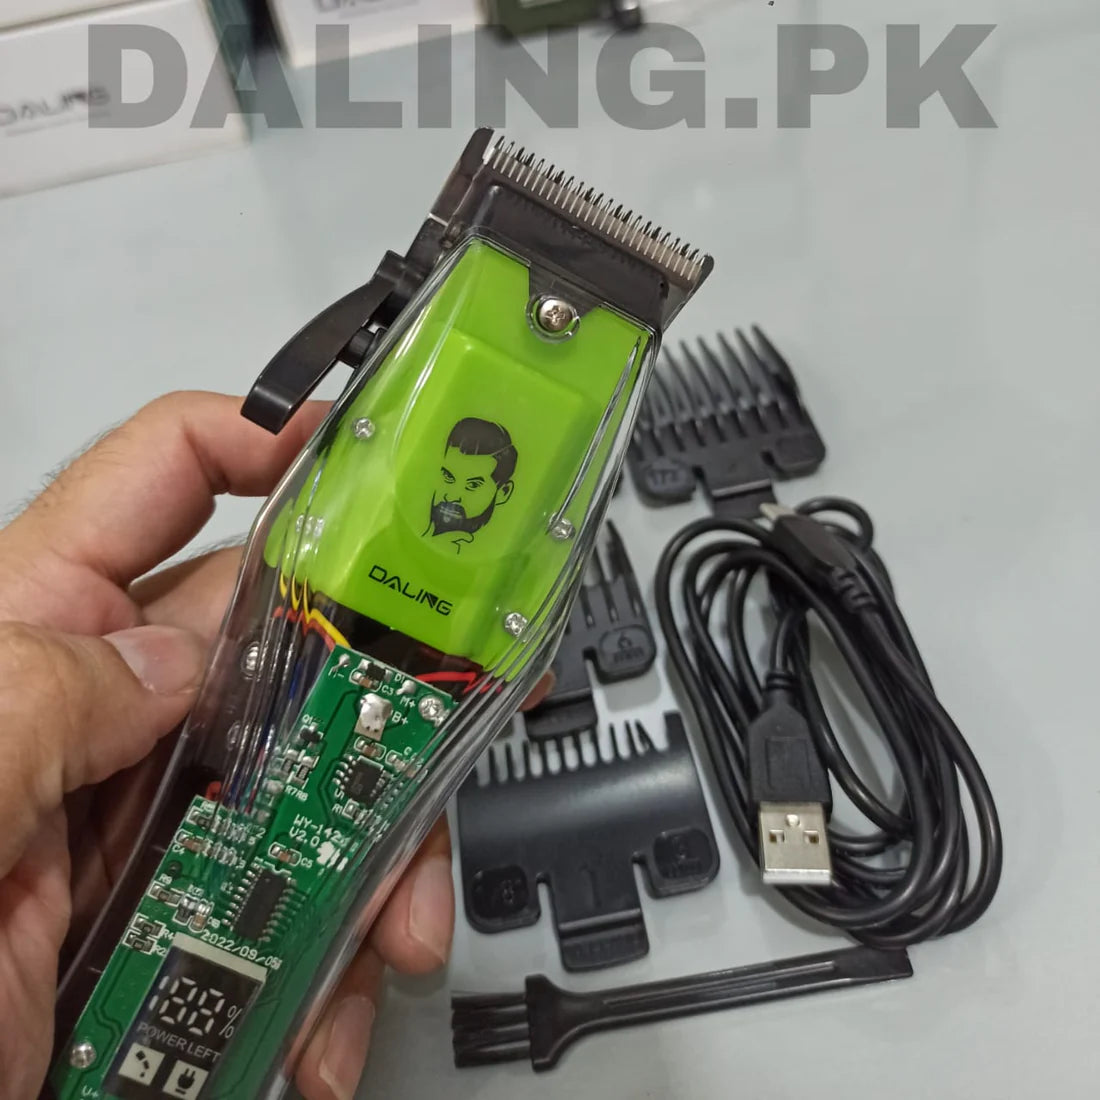 Daling Professional Trimmer